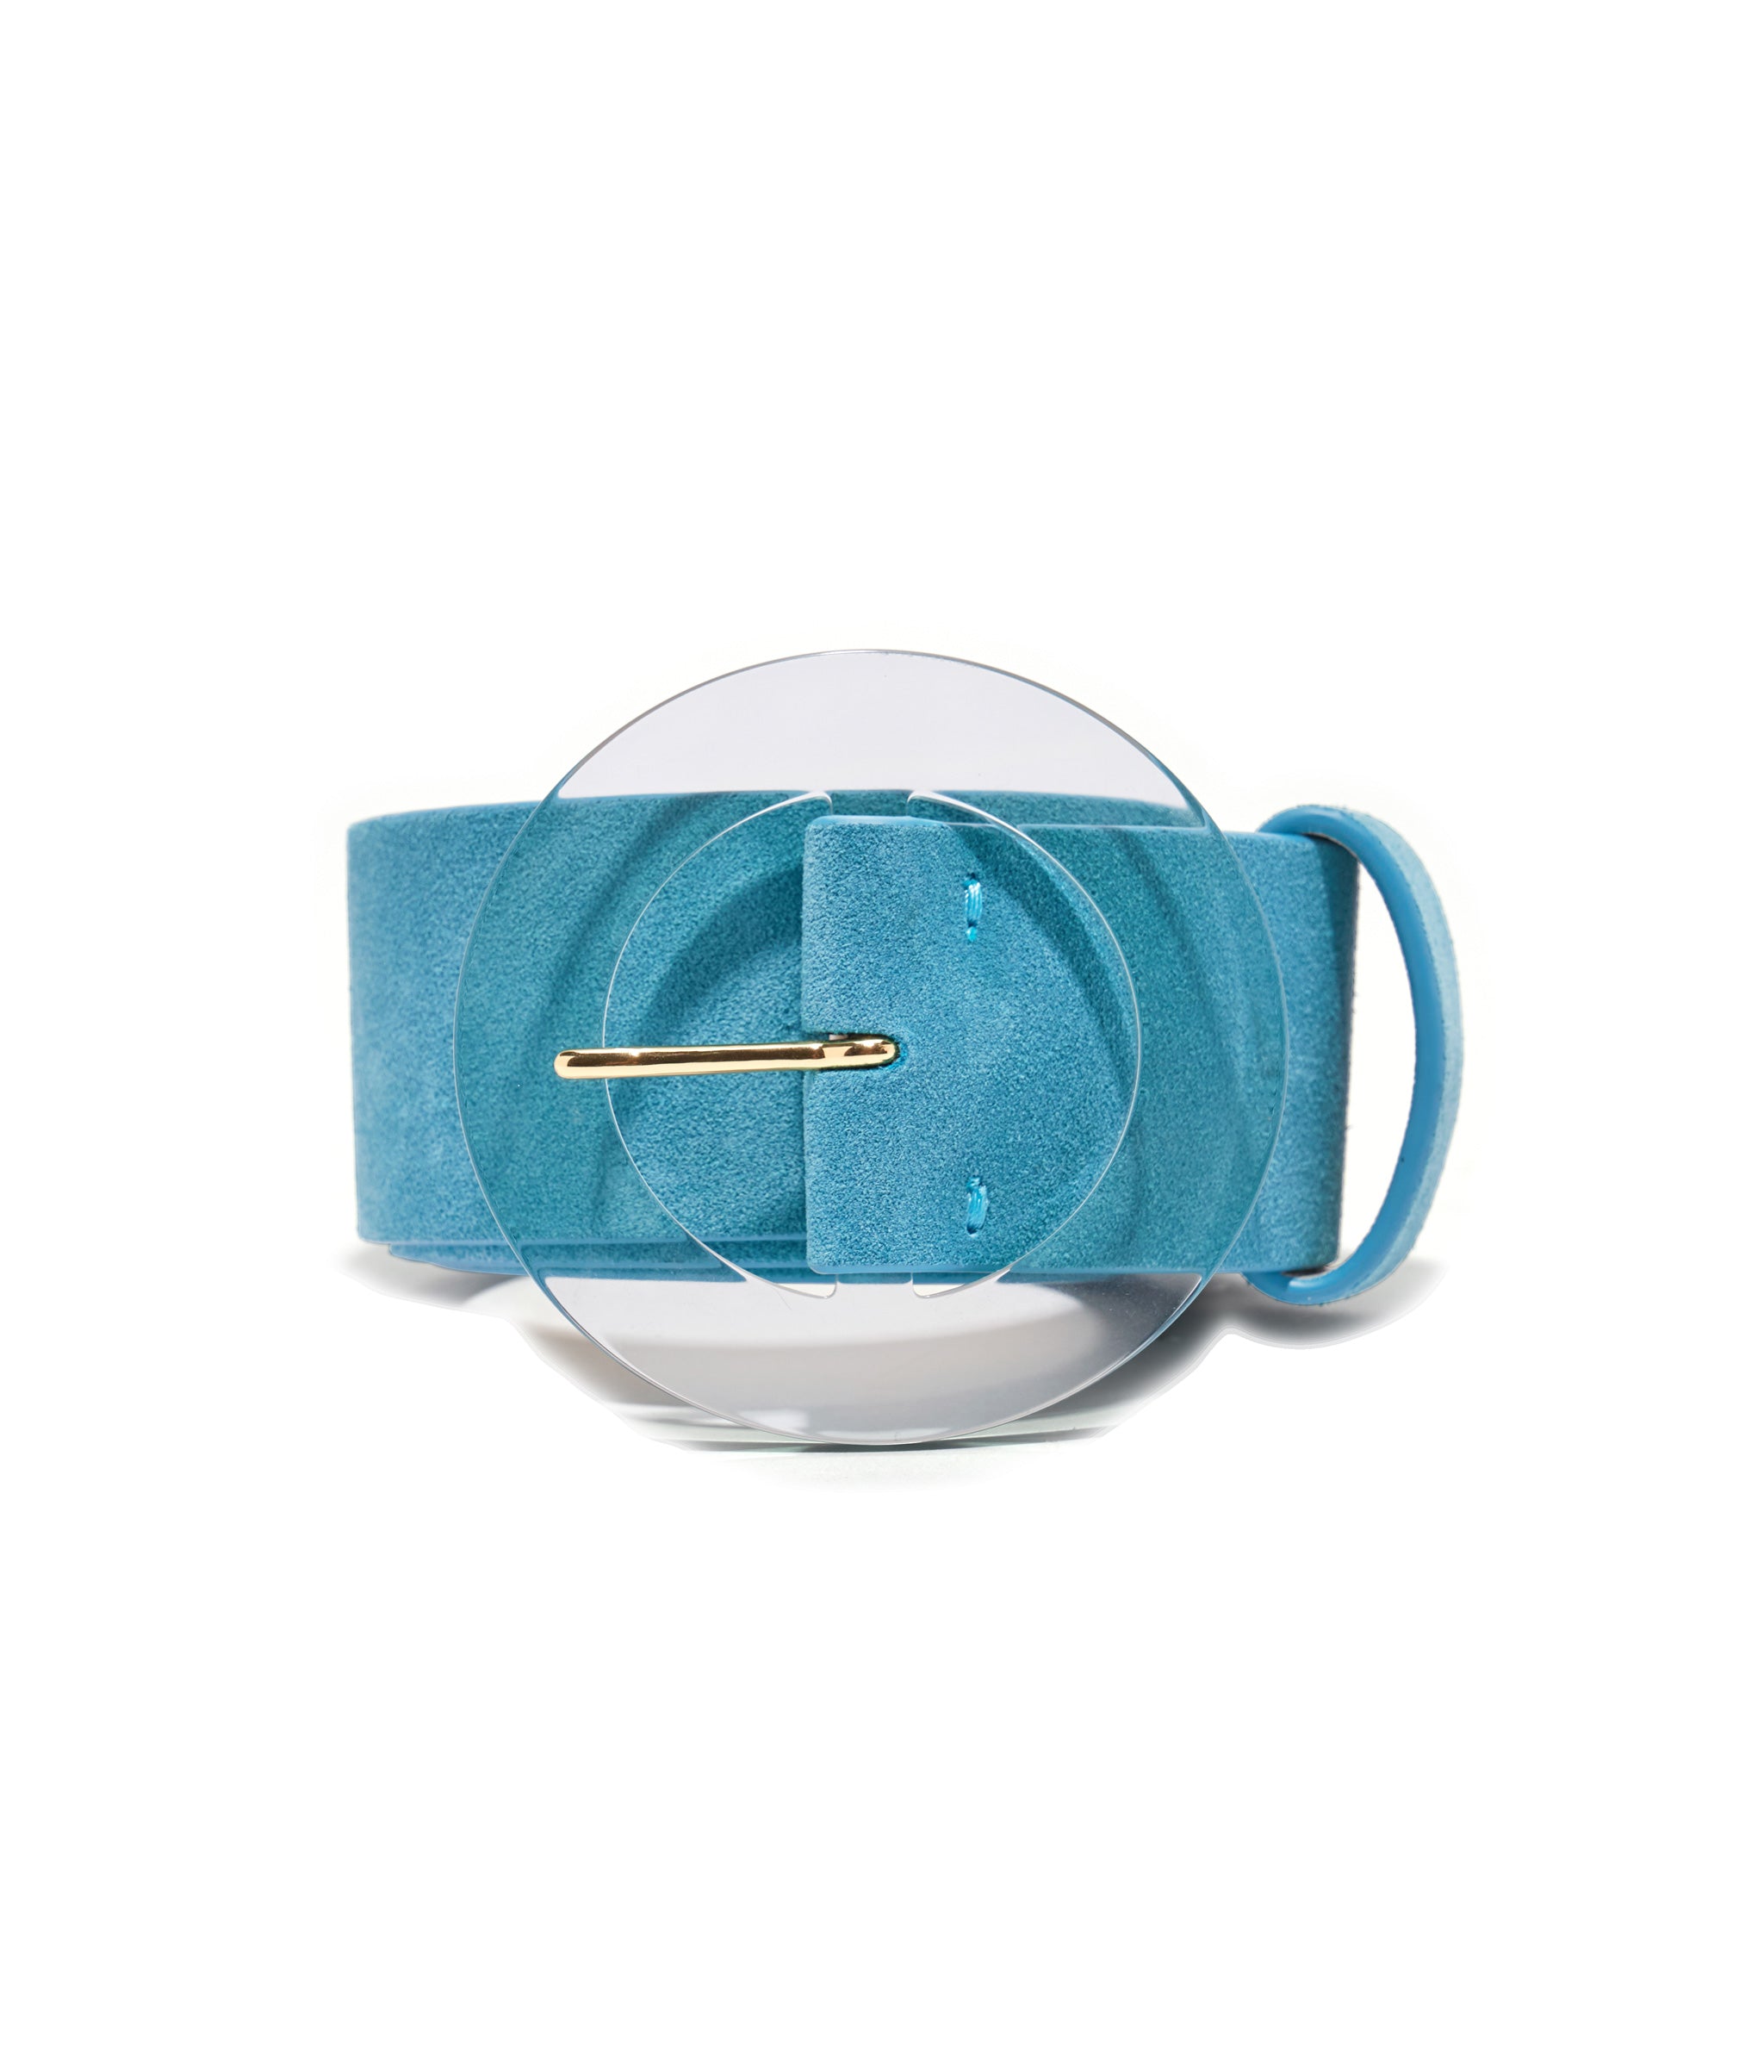 Louise Belt in Teal Suede. Wide aqua-colored suede leather with oversized round resin buckle.  